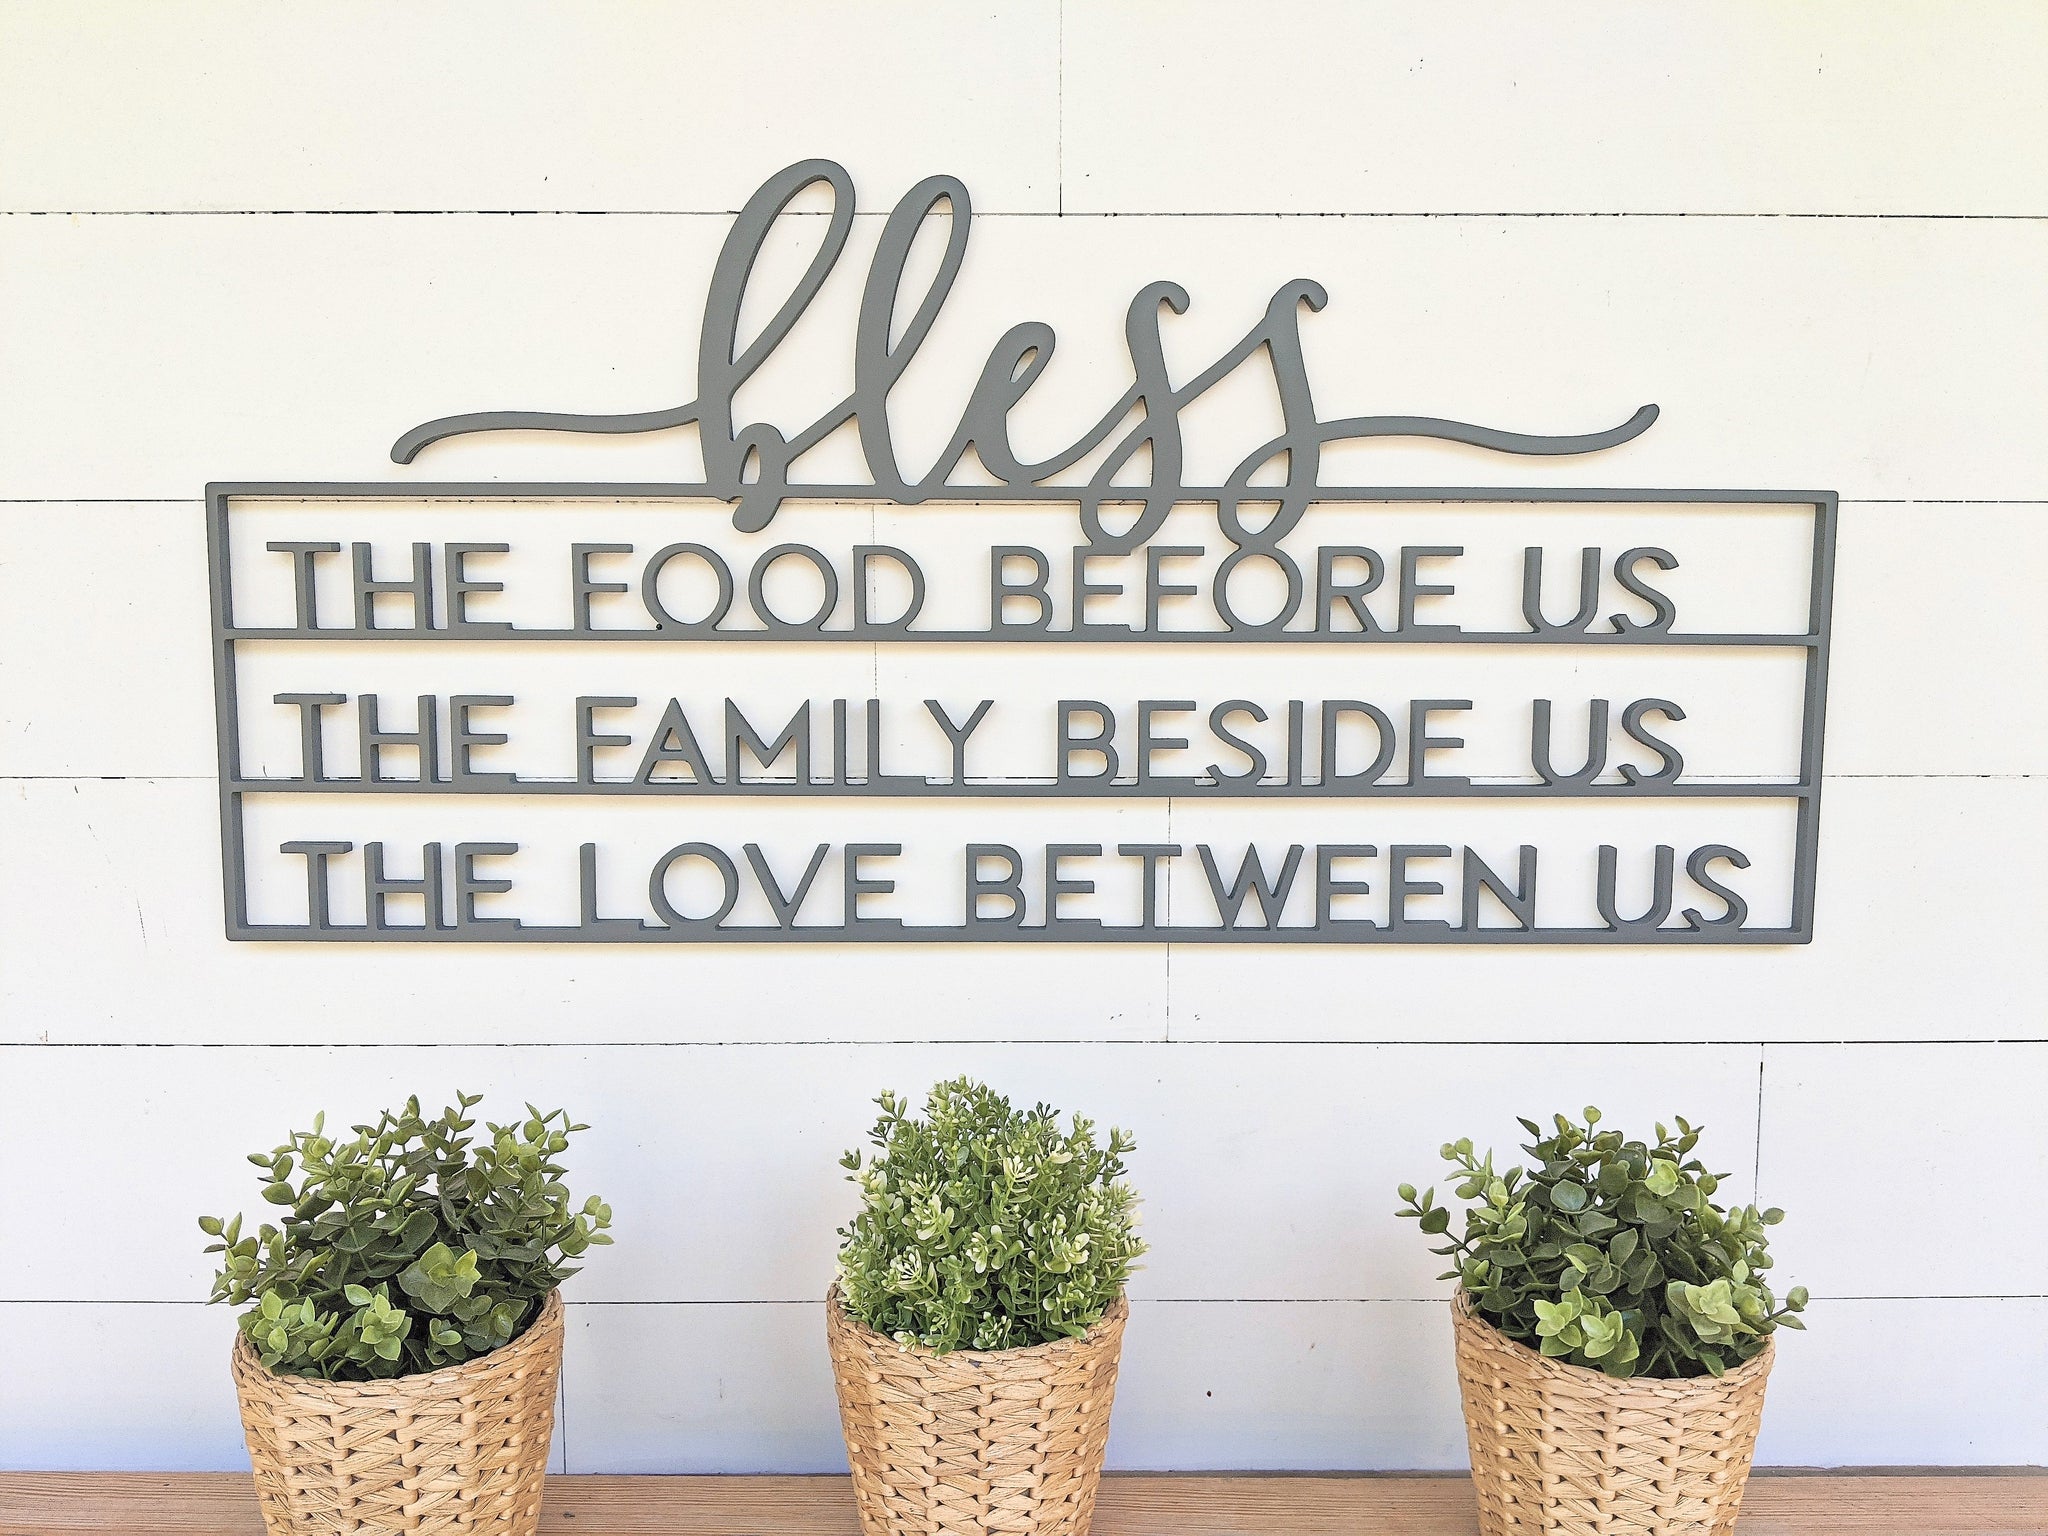 Bless the food before us, the family beside us, and the love between us.